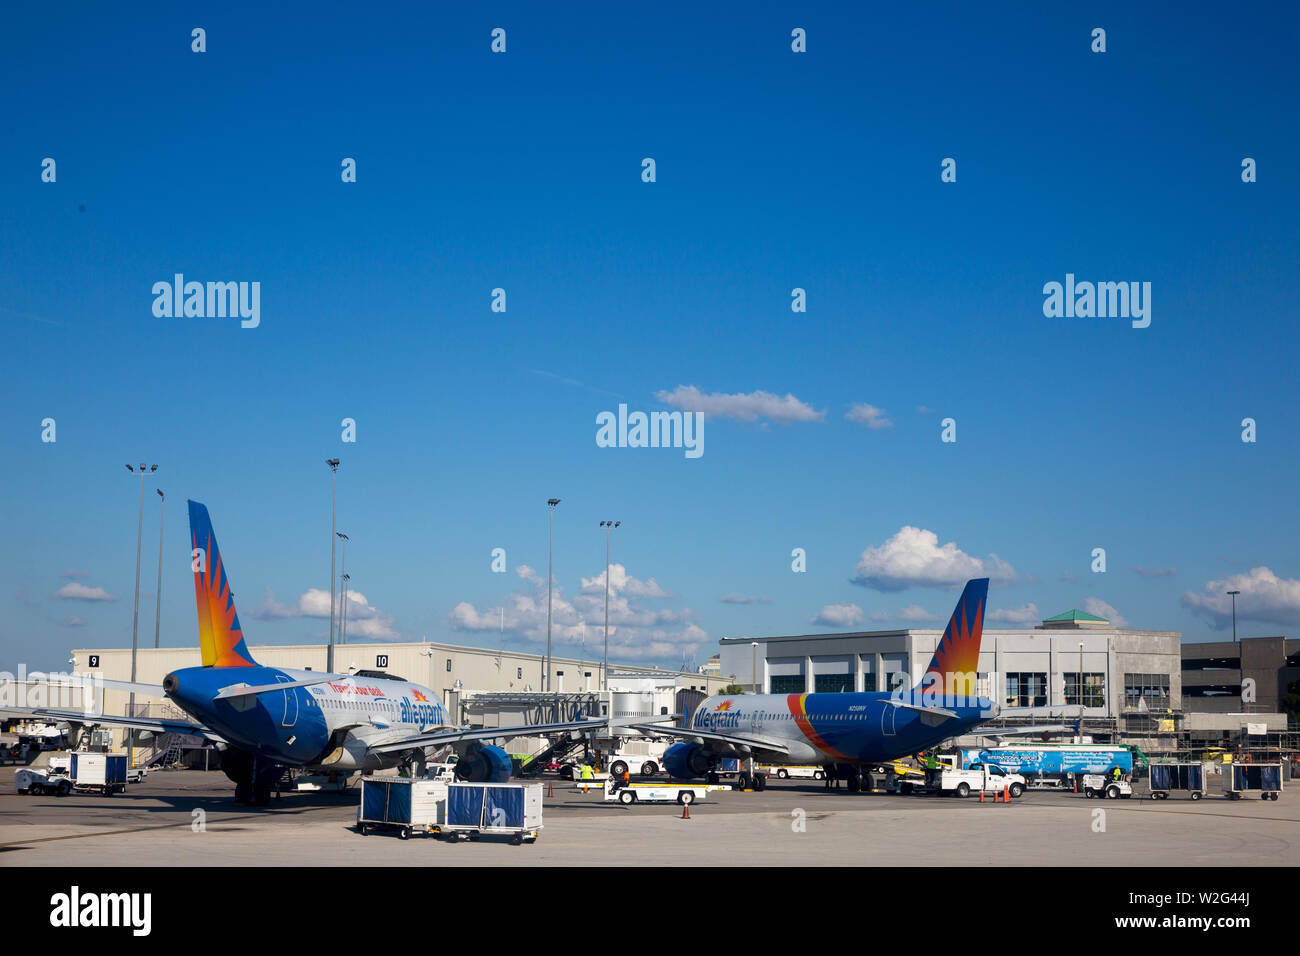 Two of Allegiant Air's fleet of Airbus A320 jet airliners are parked at the Orlando Sanford International Airport terminal in Sanford, Florida, USA. Stock Photo